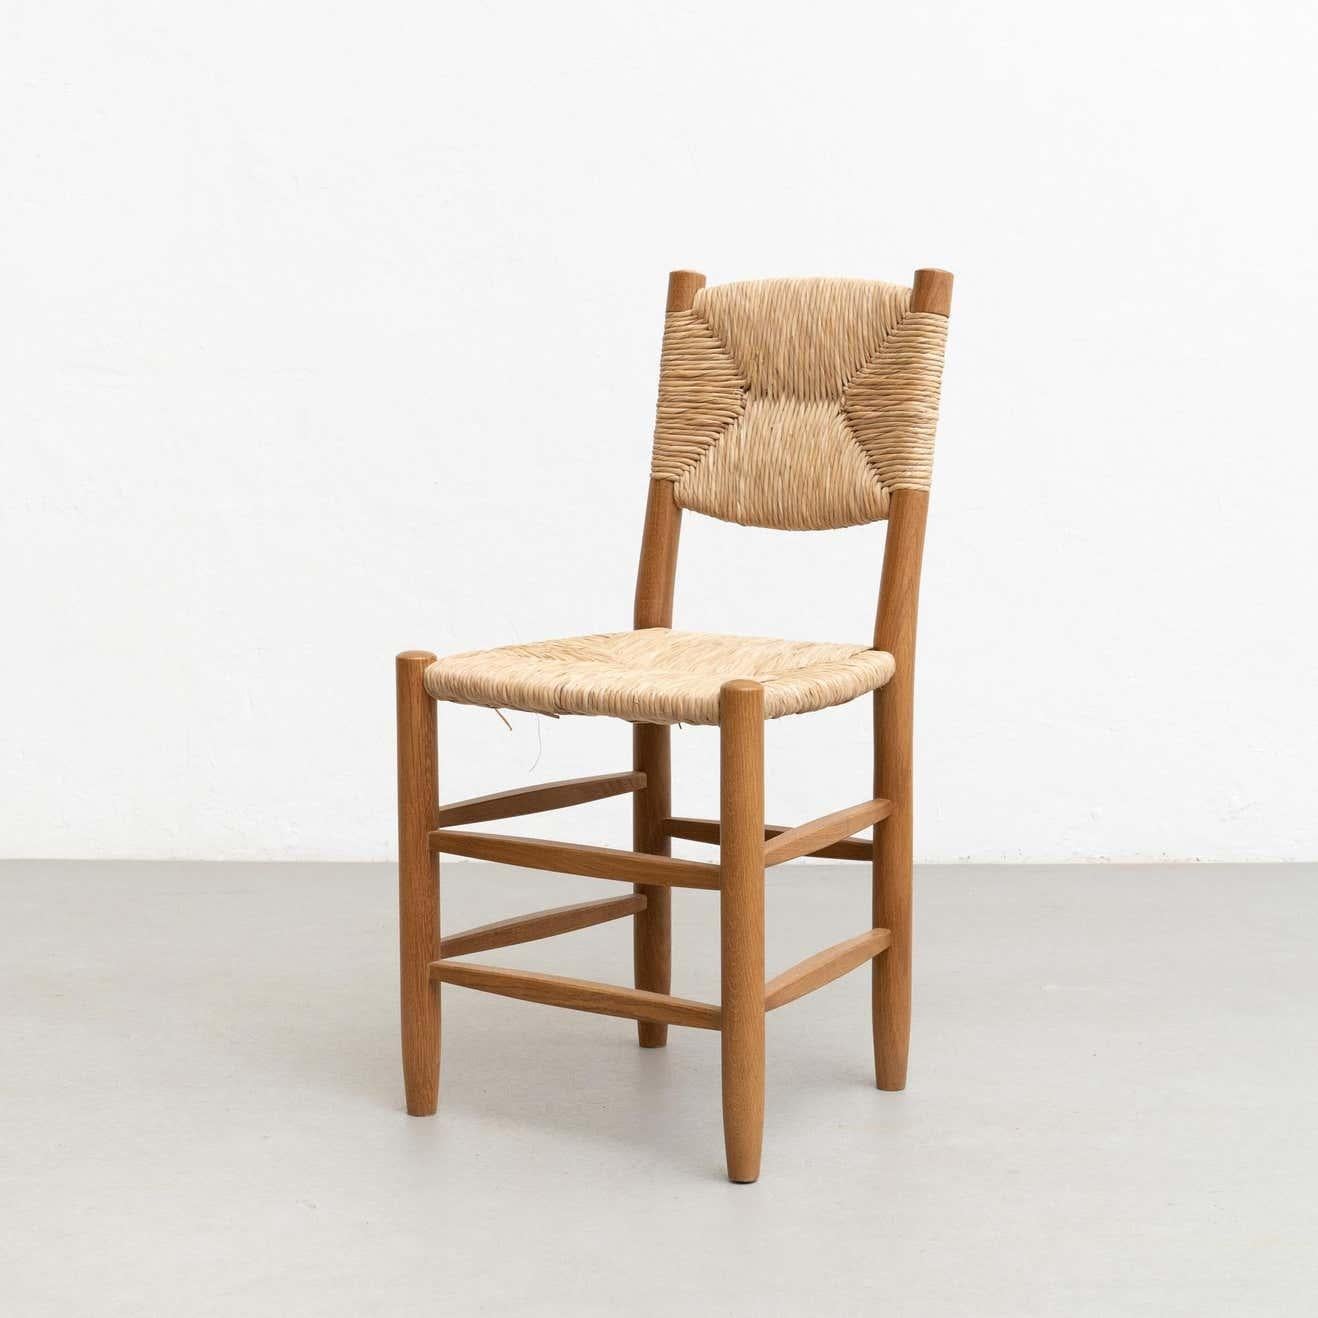 Set of Six After Charlotte Perriand N.19 Chairs, Wood Rattan, Mid-Century Modern For Sale 11